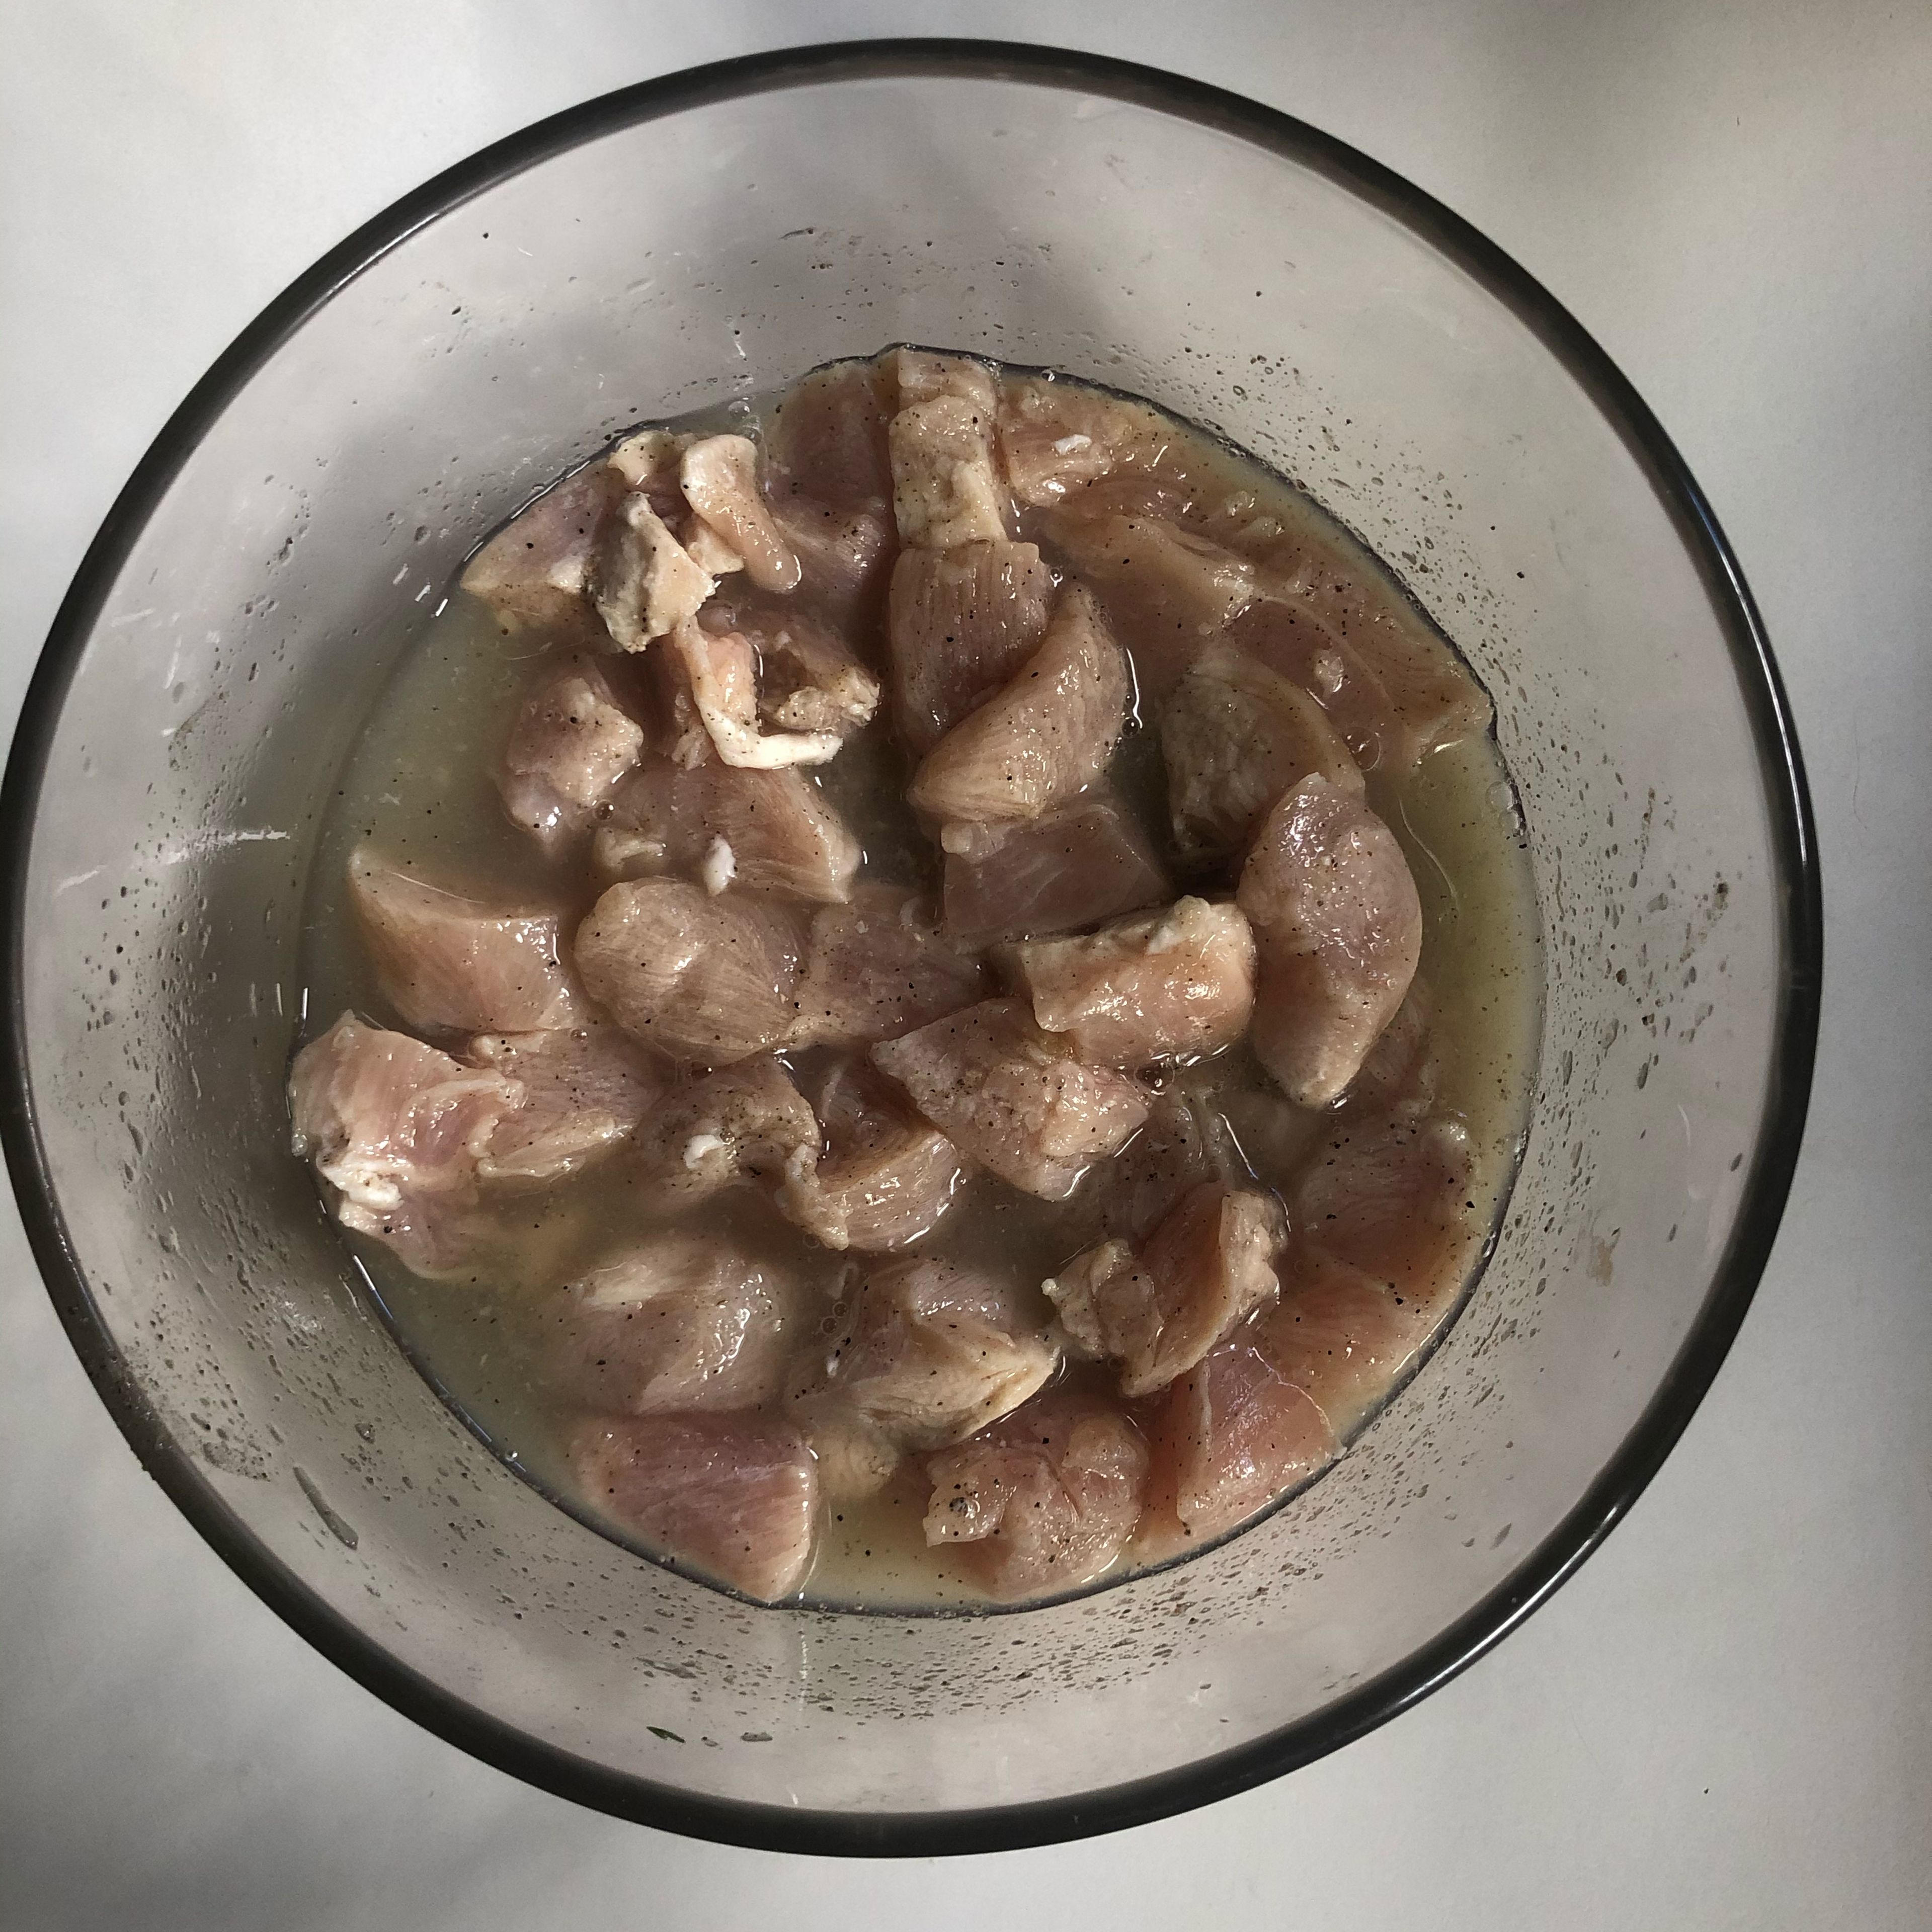 Cut the chicken strips in cubes and season it with lemon, pepper, salt and olive oil. After that, live it marinating for about 15min.